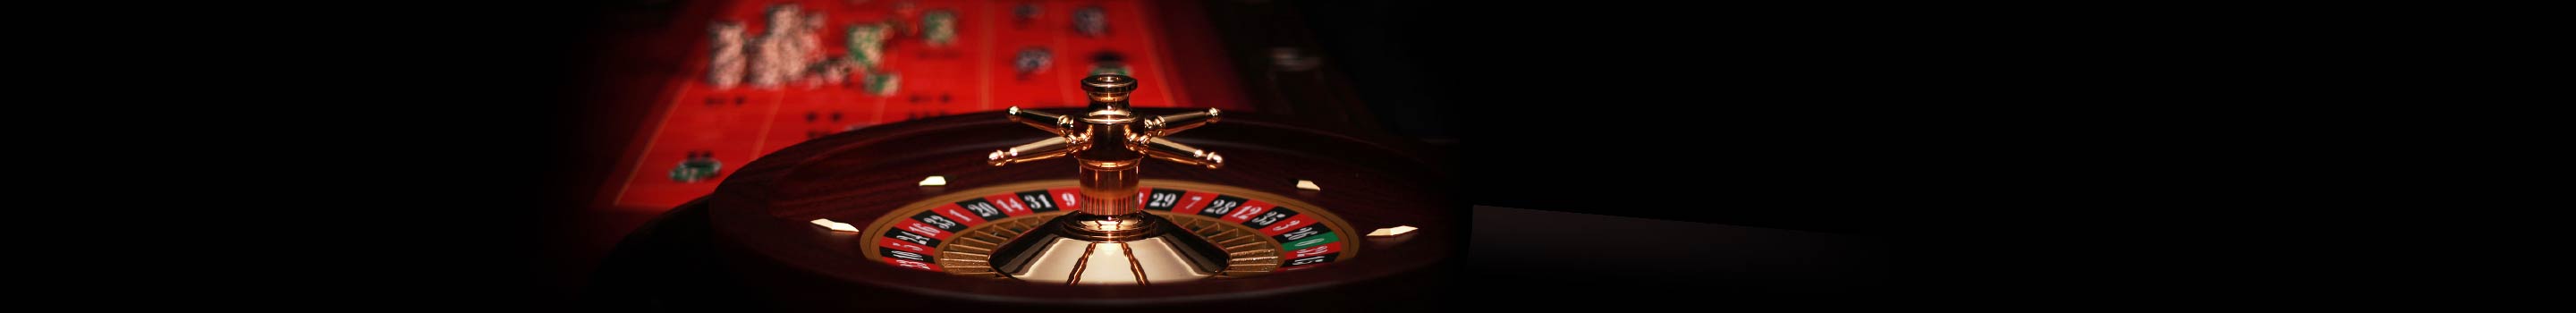 Roulette systems and game strategies